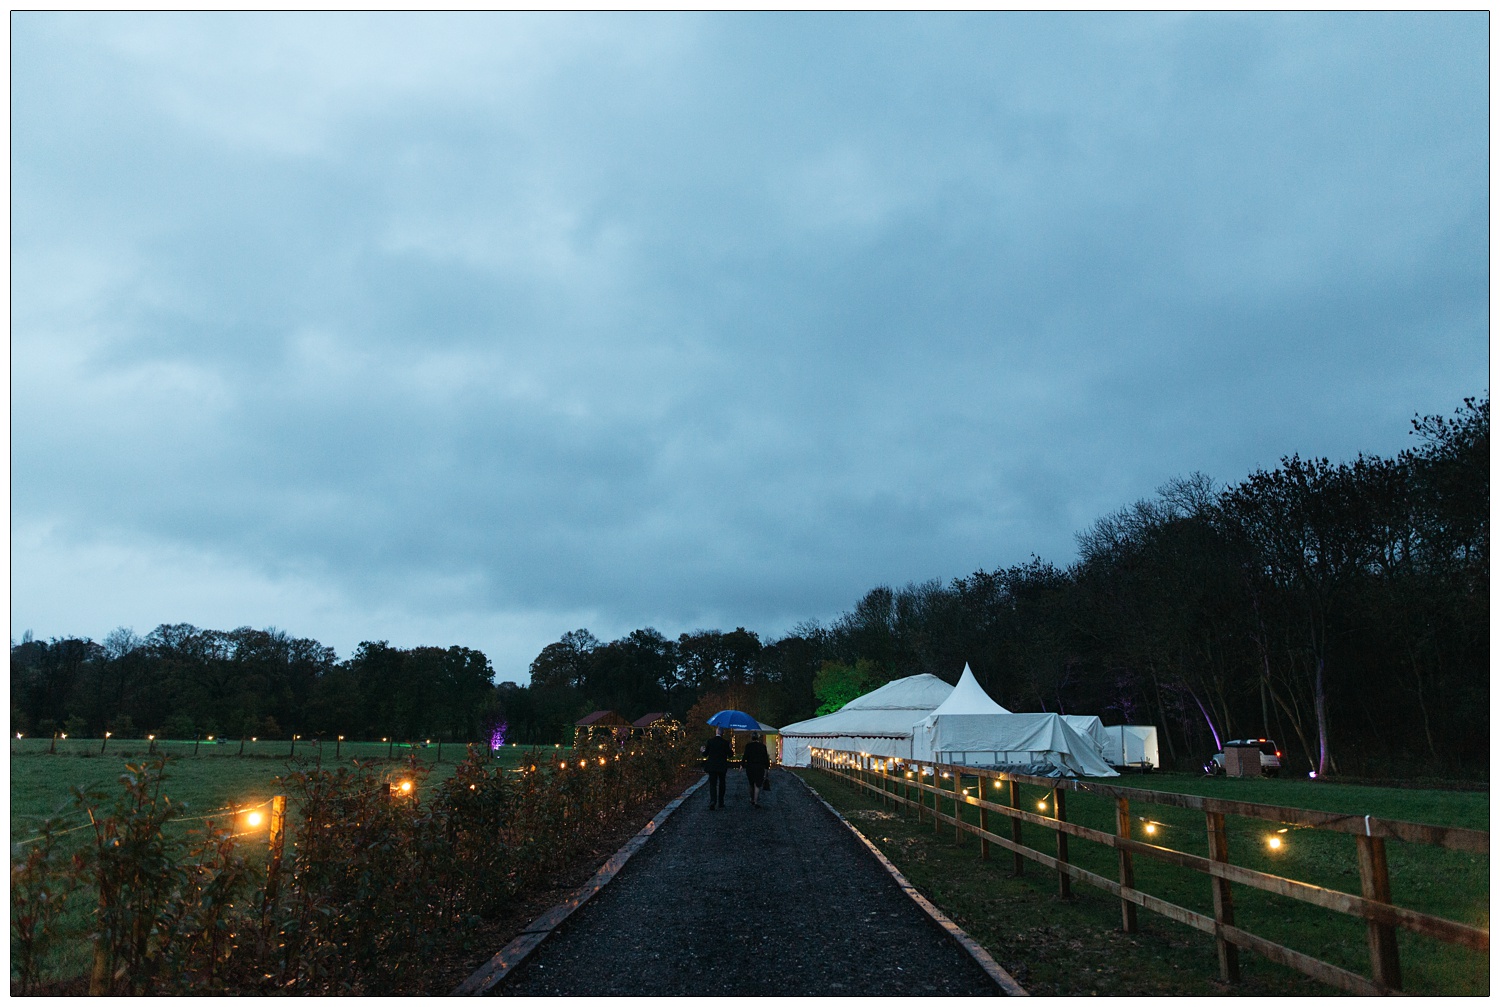 The path to the orangery style tent for a wedding. The sky is grey and it is windy.